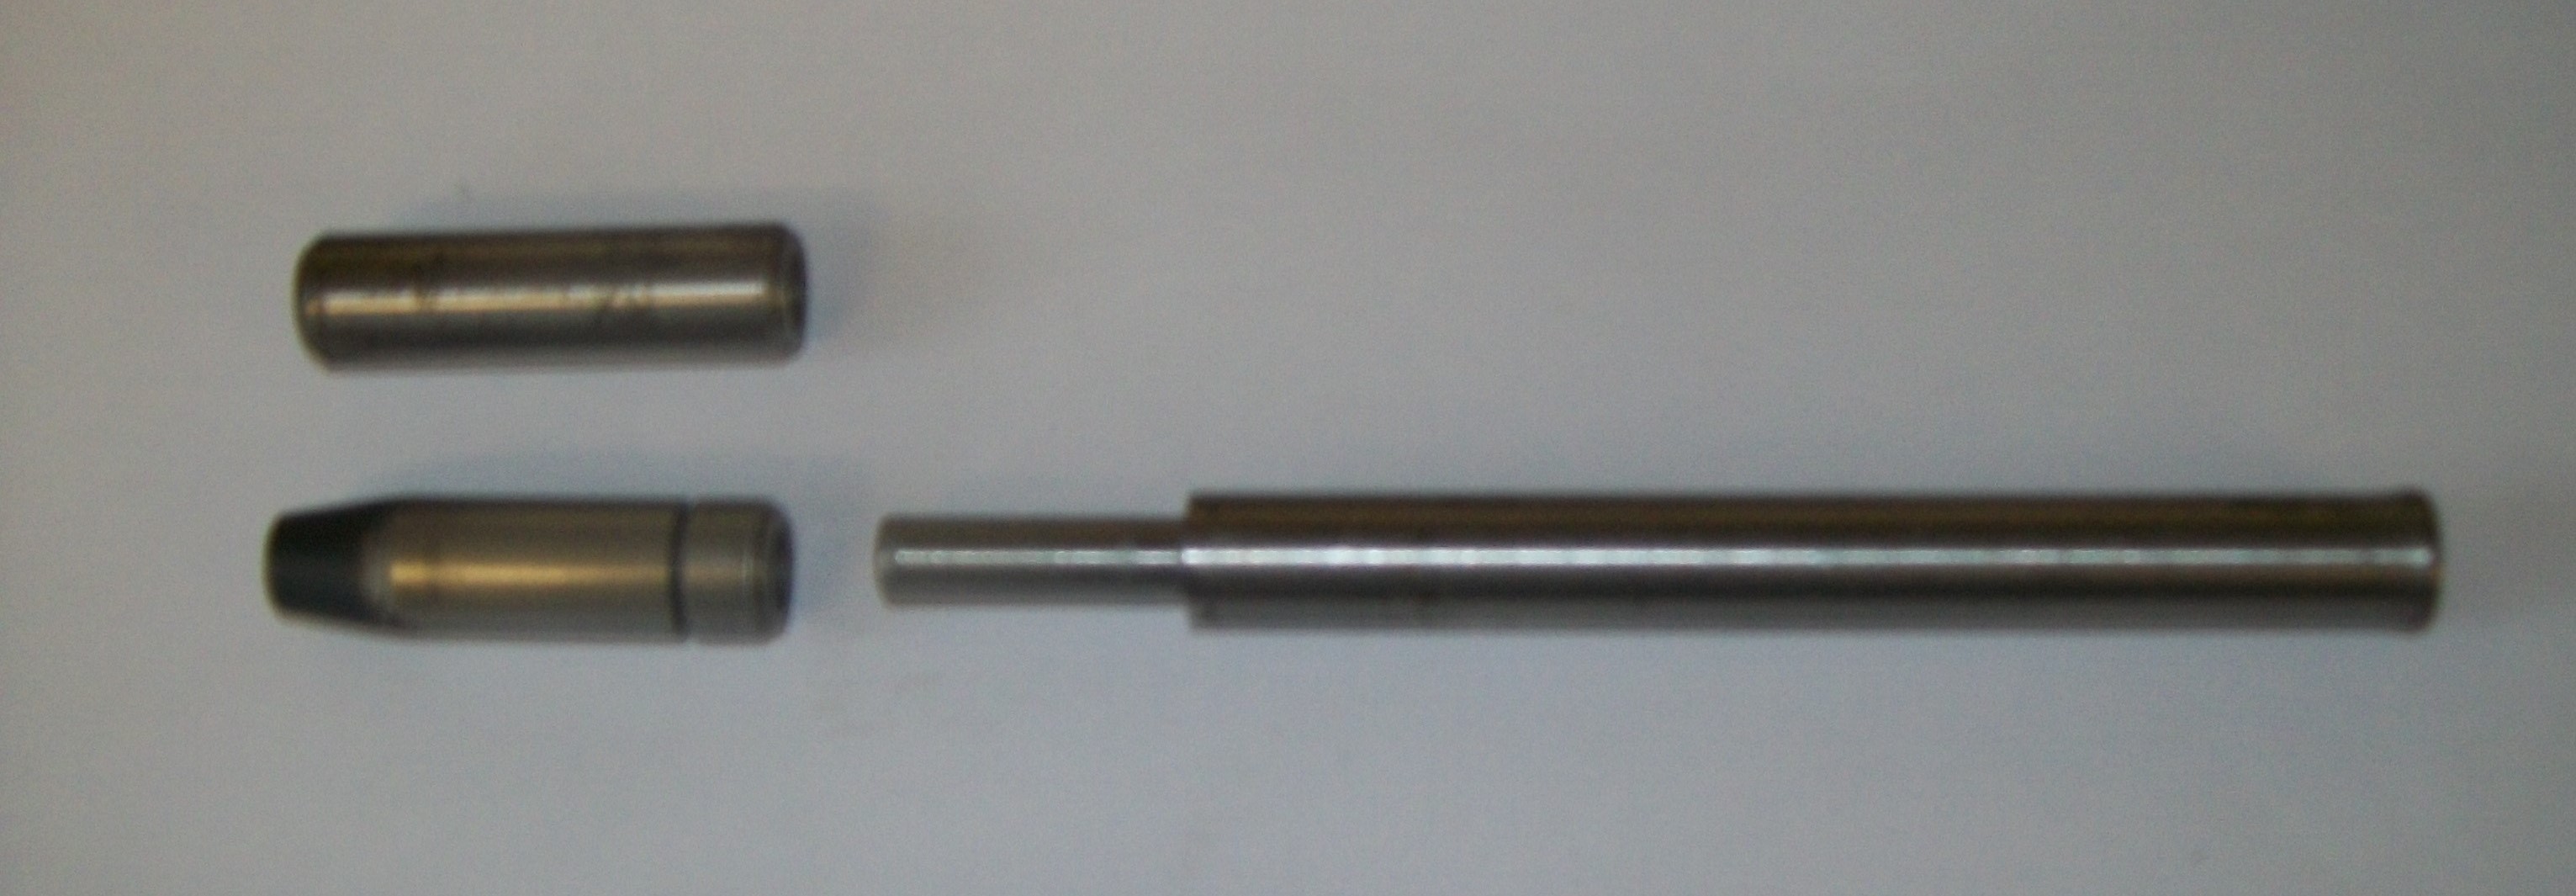 Valve guides and tool.JPG